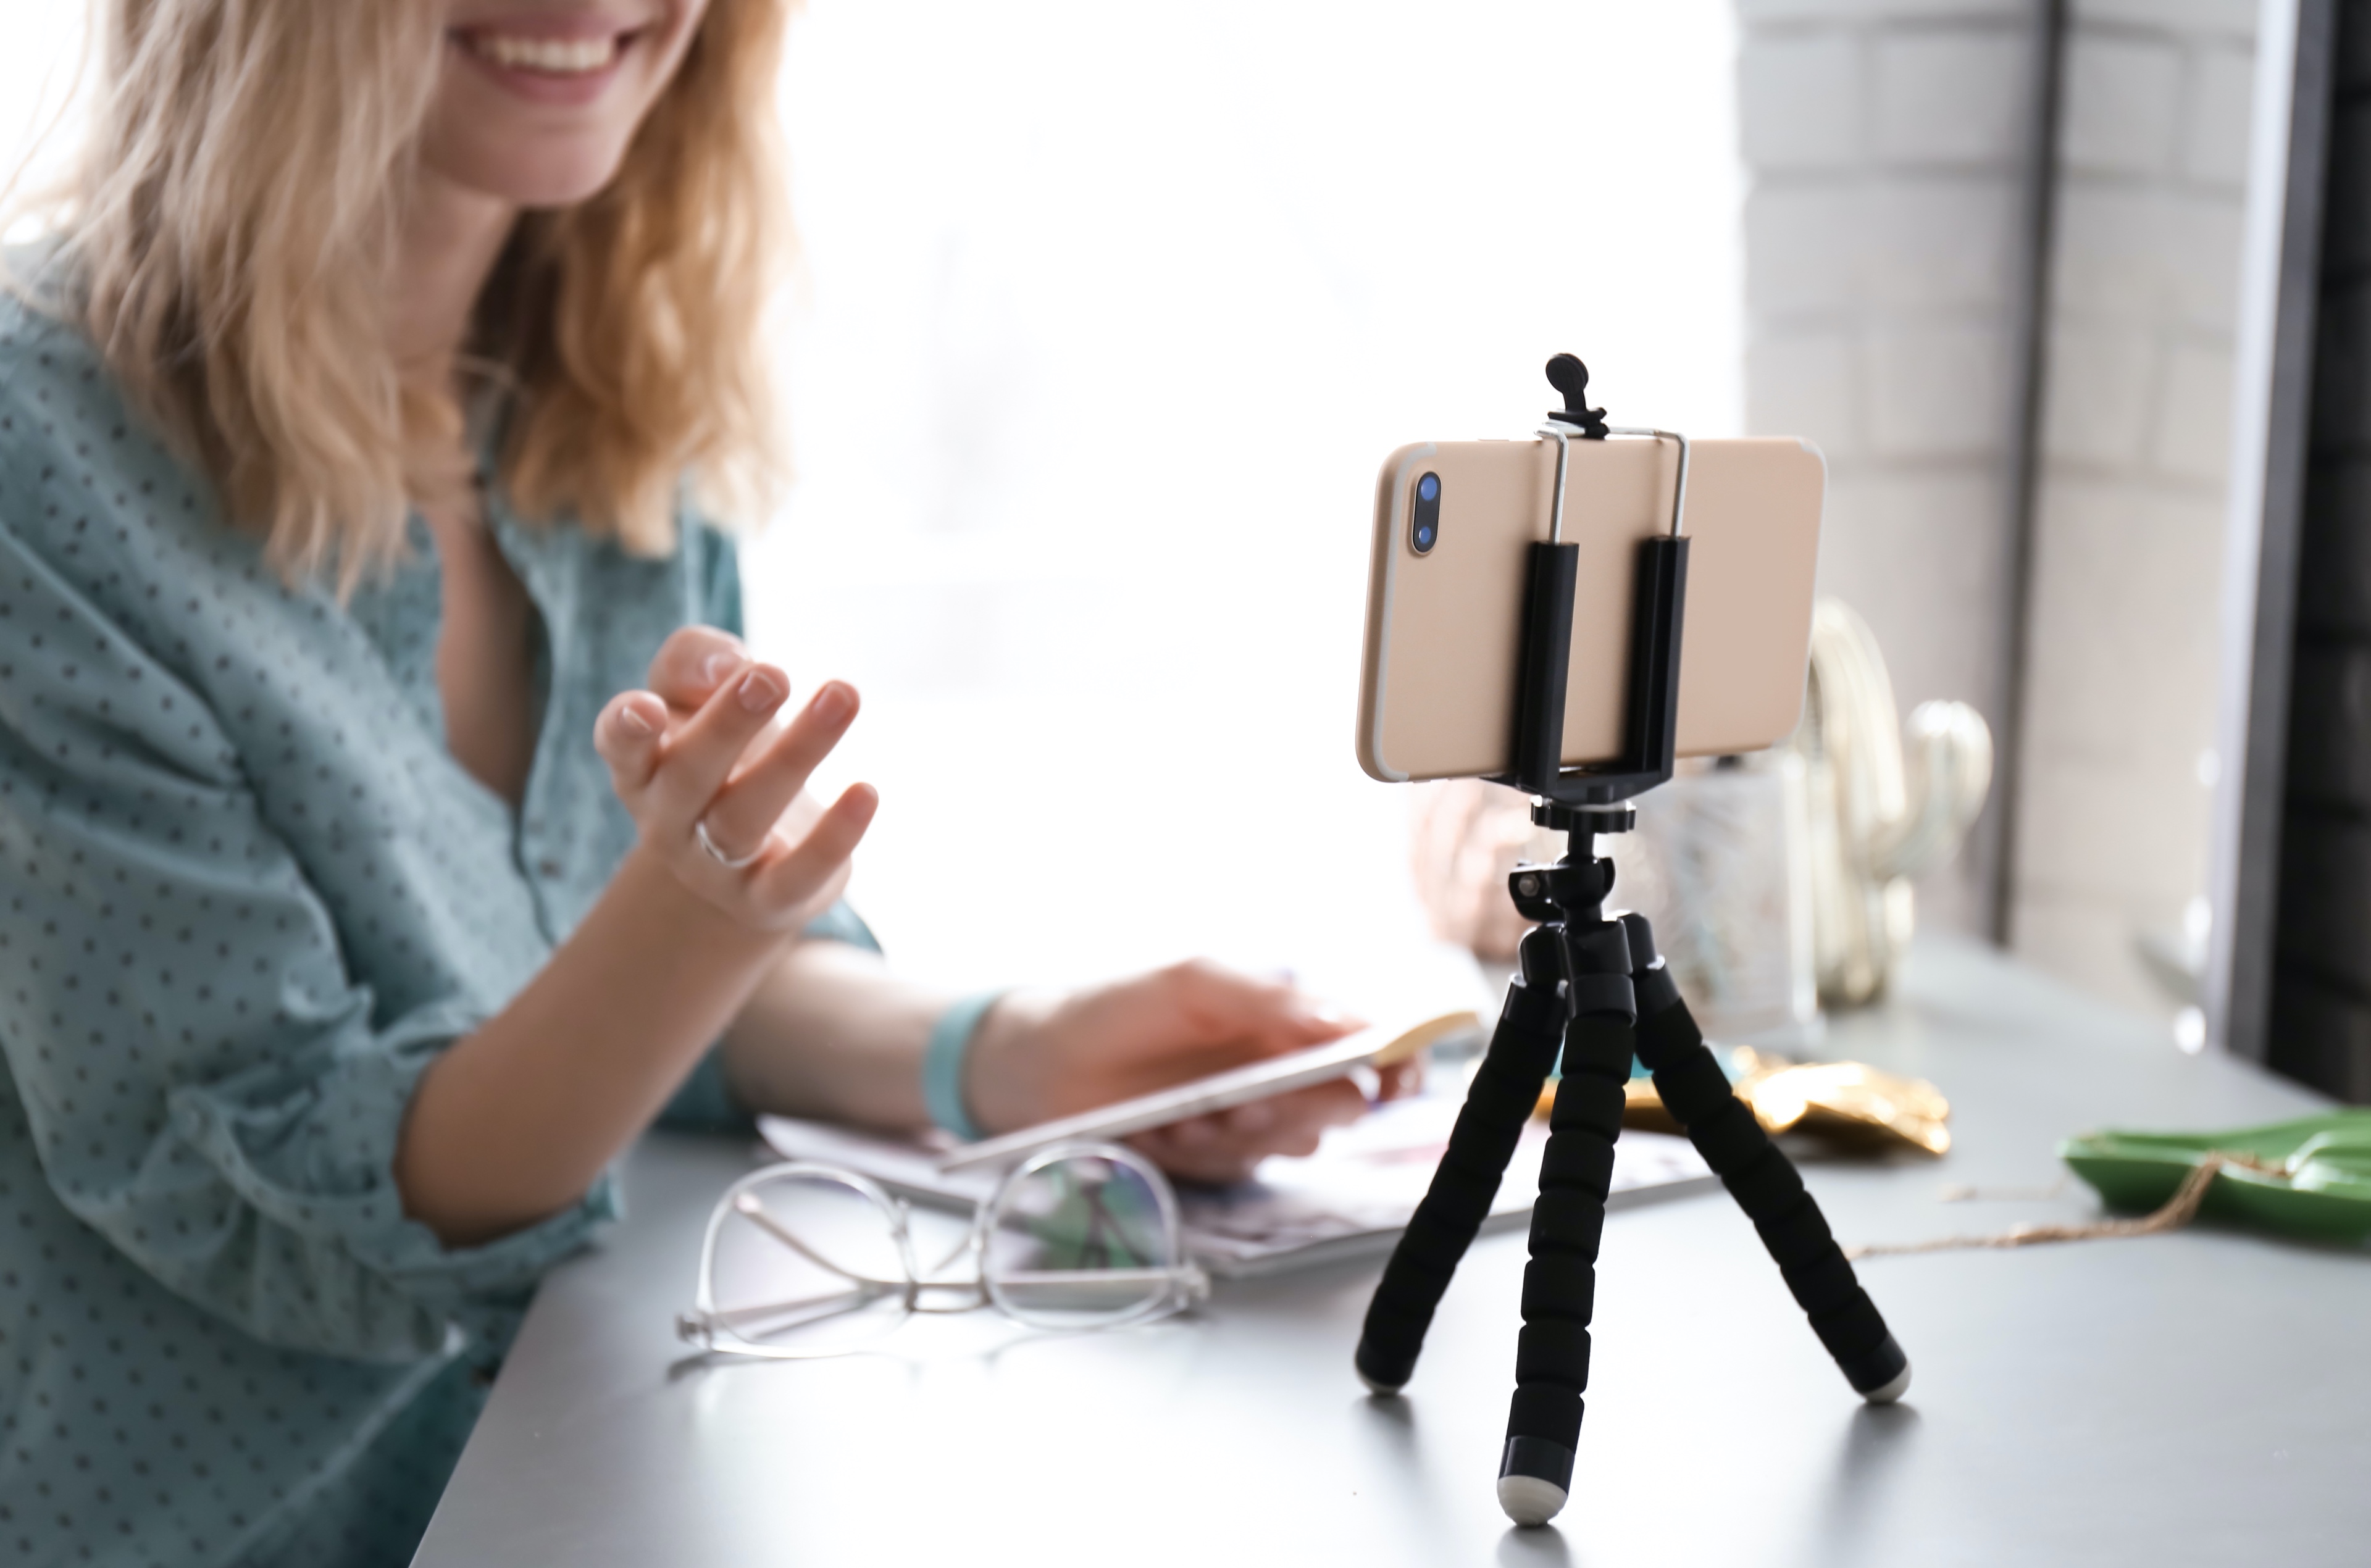 Copy_of_community-voices-woman-with-smartphone-tripod.jpg